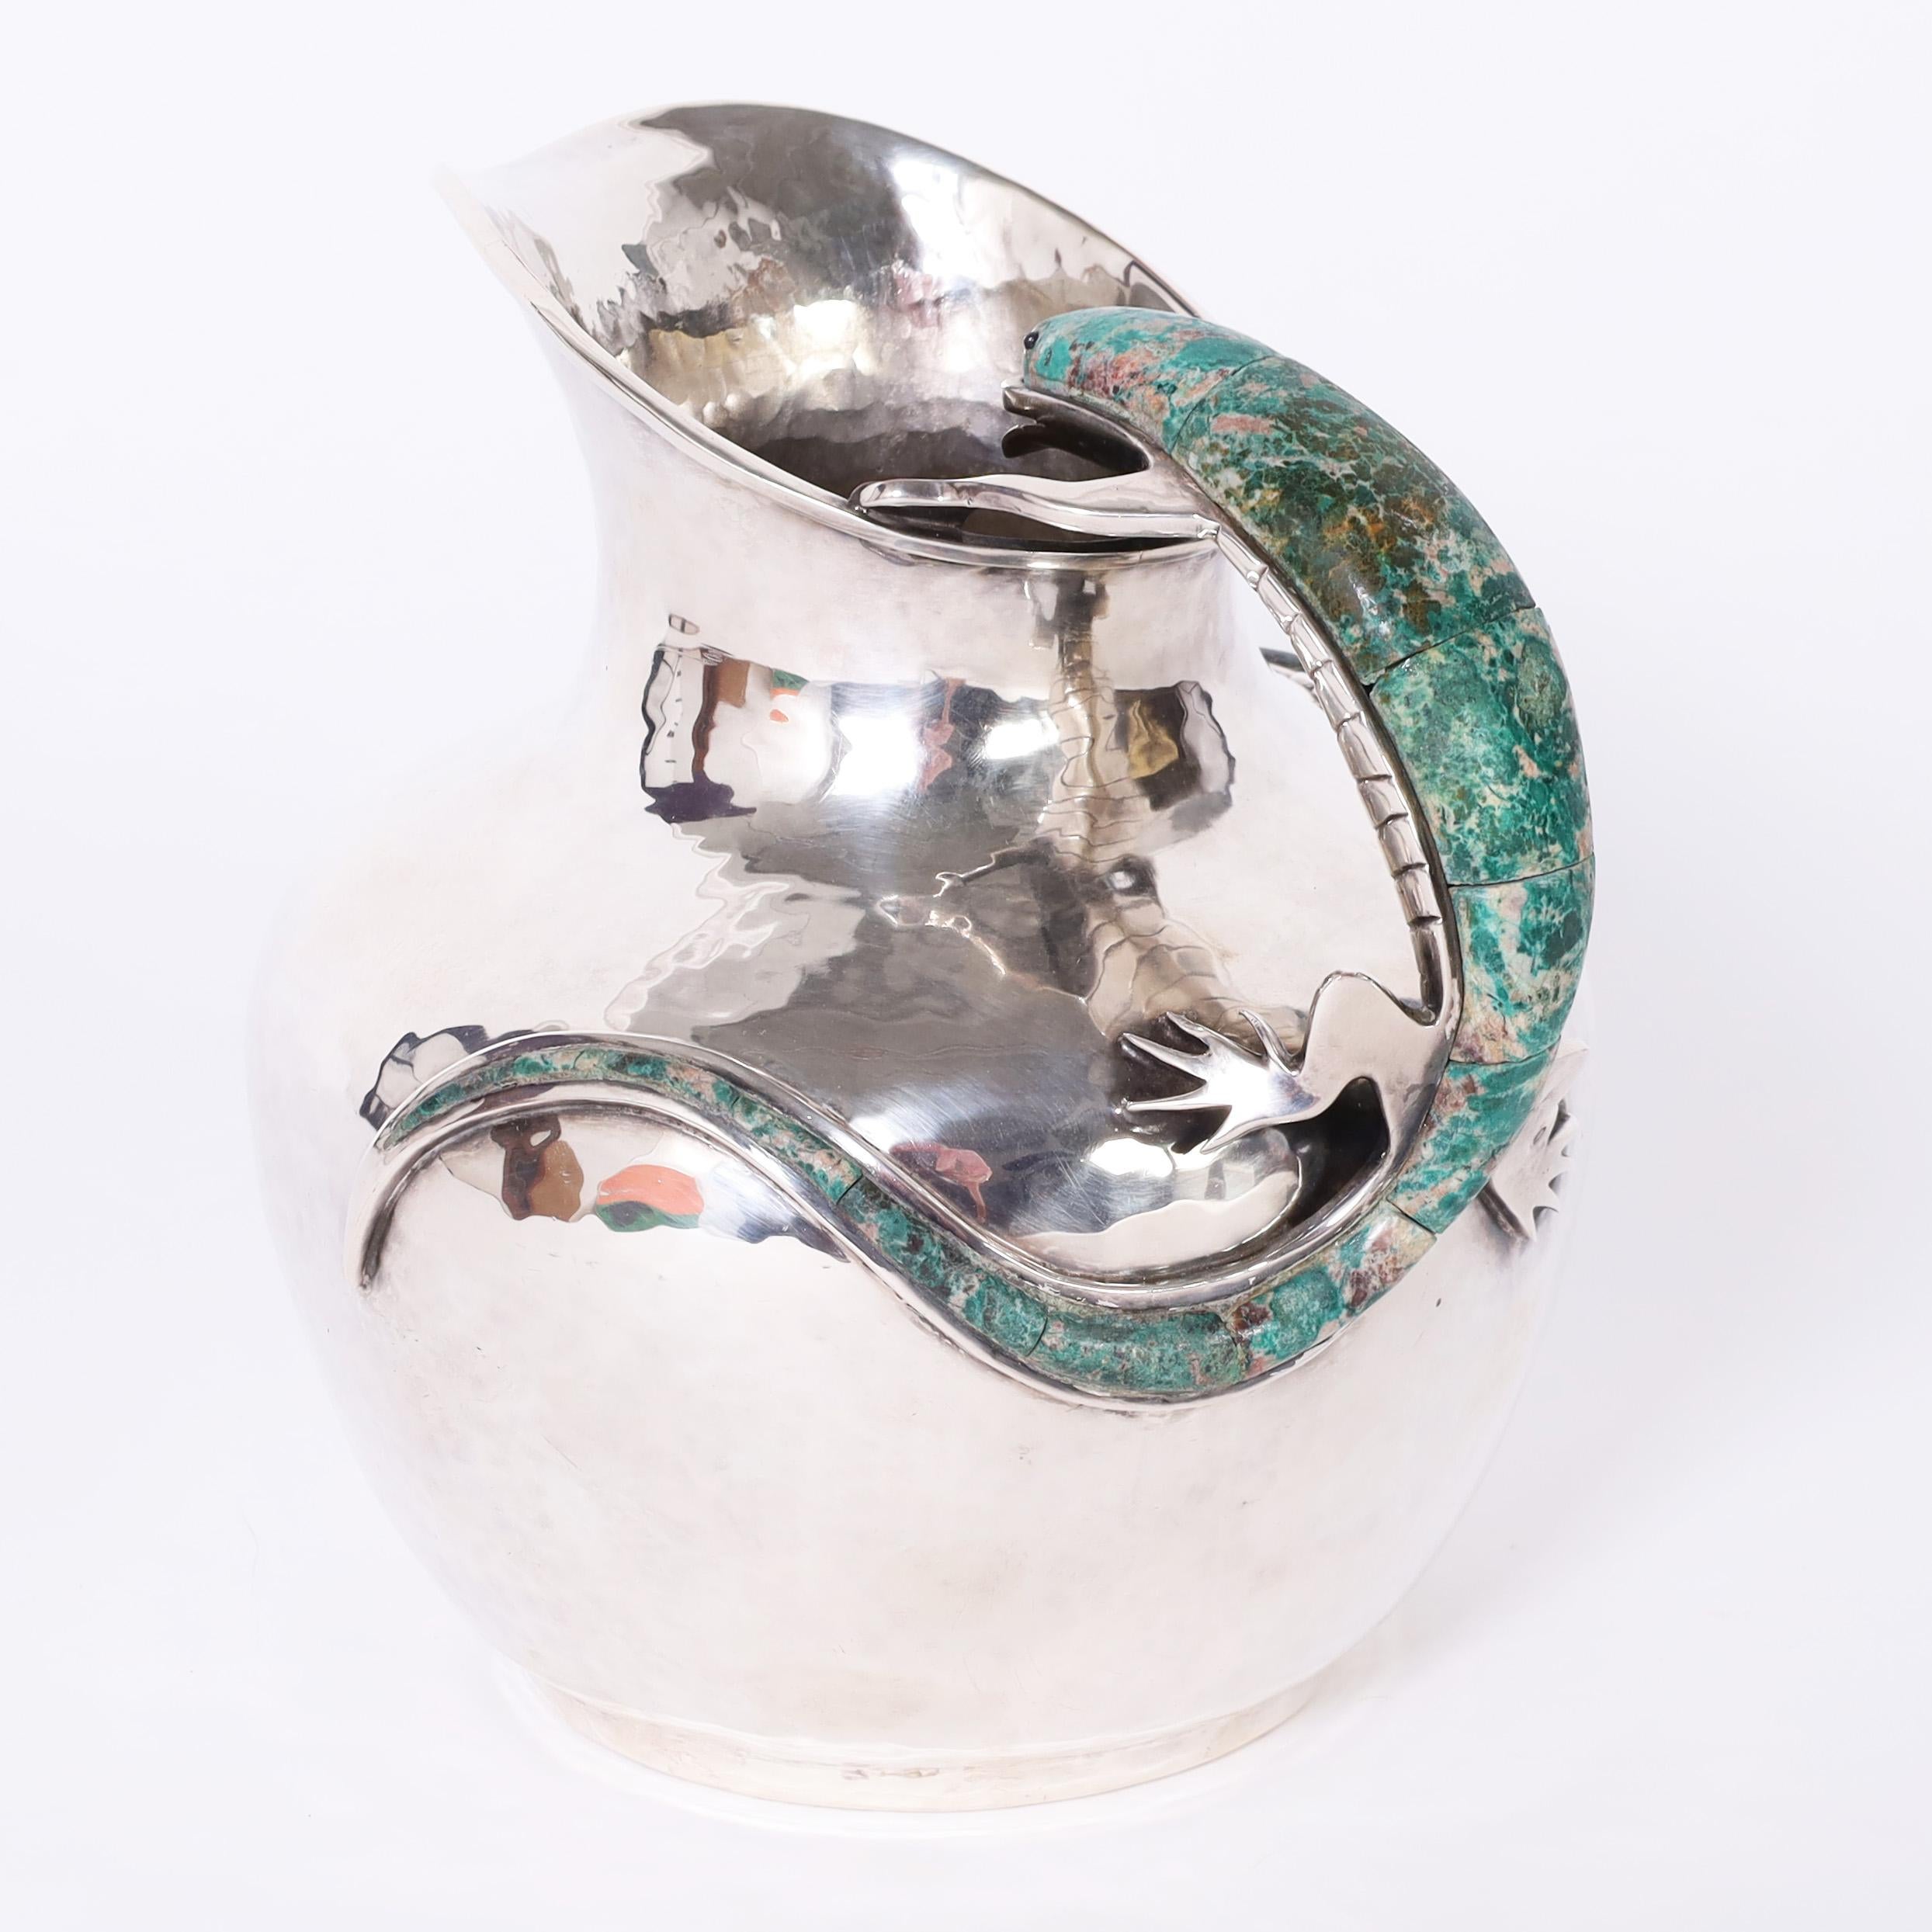 Standout modern form pitcher handcrafted in silver plate over hammered copper featuring a turquoise clad salamander or lizard as a handle and a smaller one attached to the side. Stamped Emilia Castillo Mexico on the bottom. 